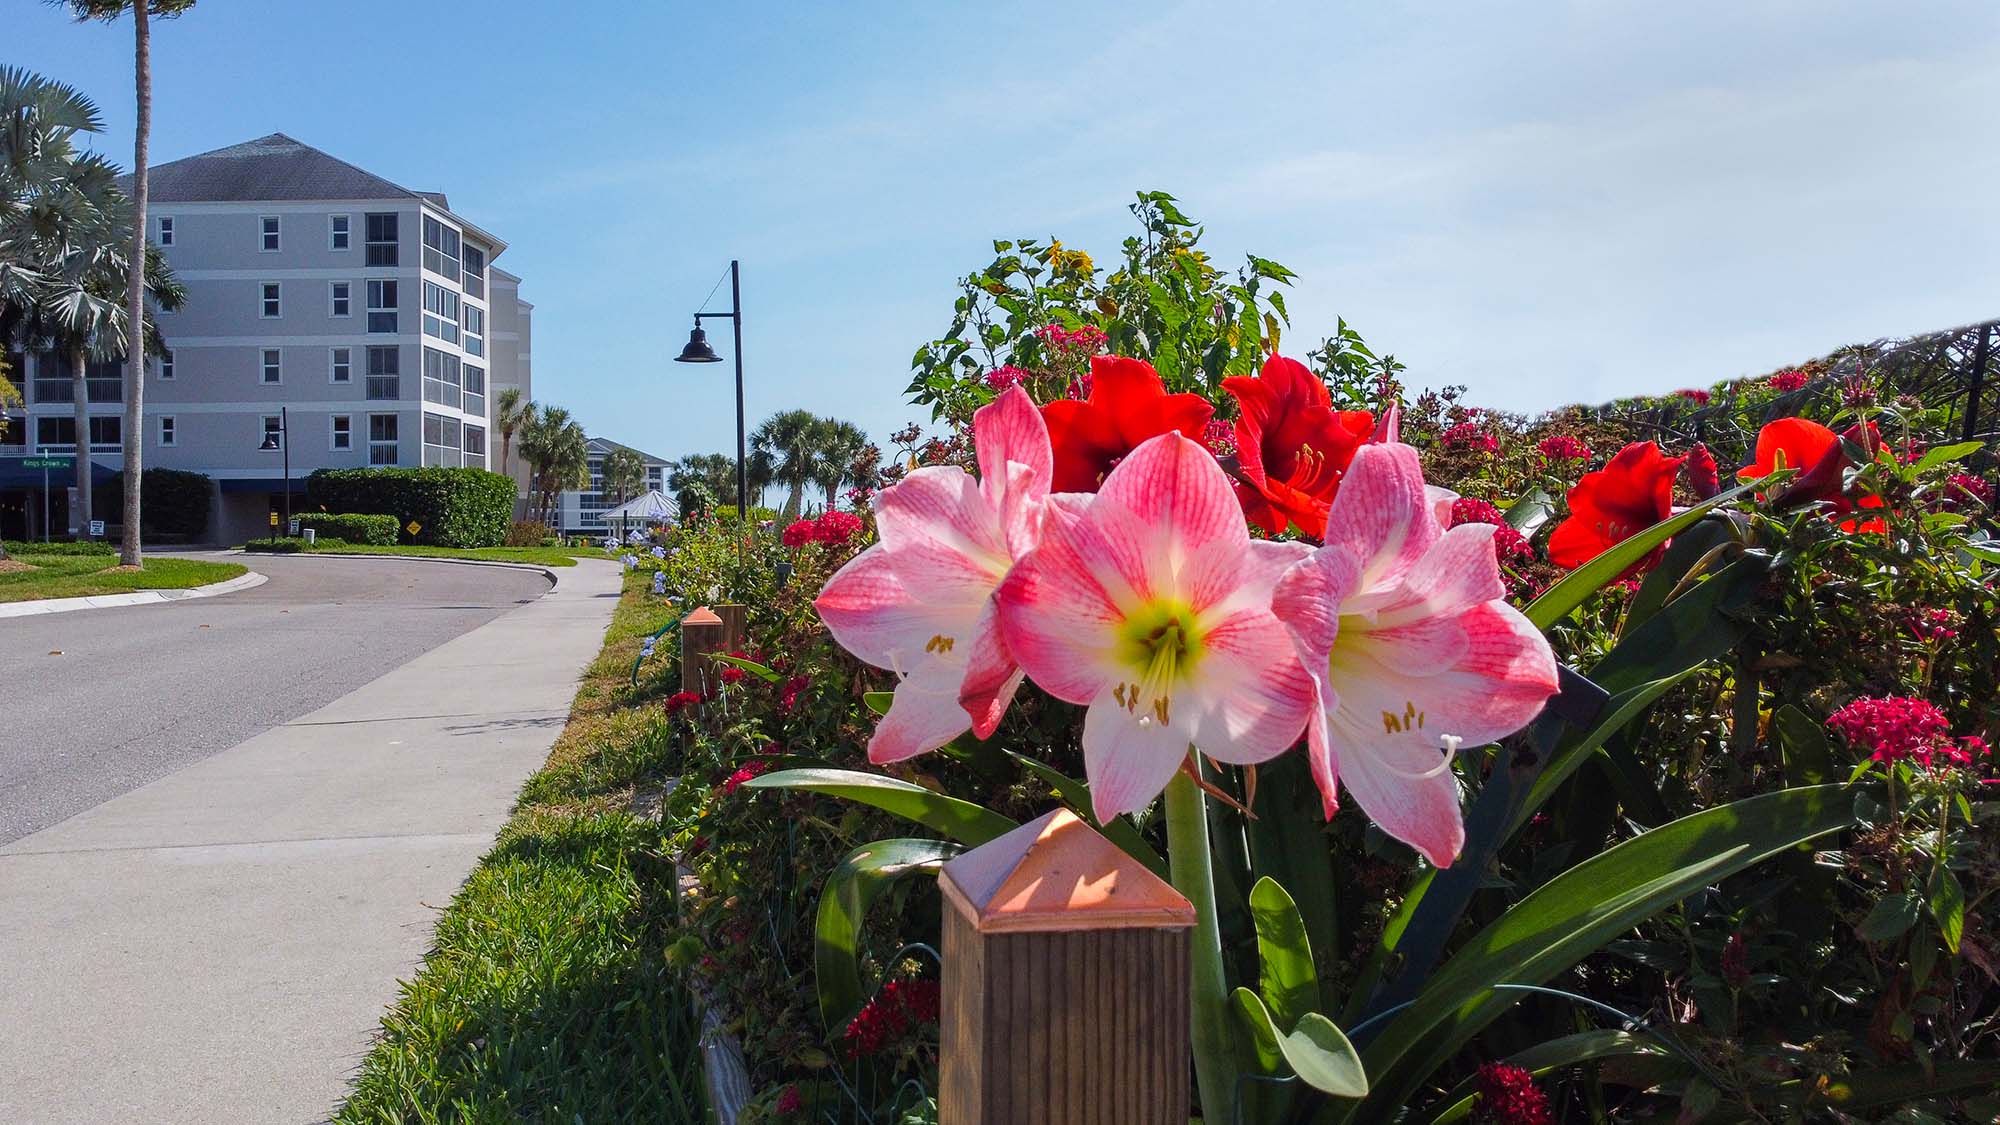 The gardens on The Island at Shell Point Retirement Community